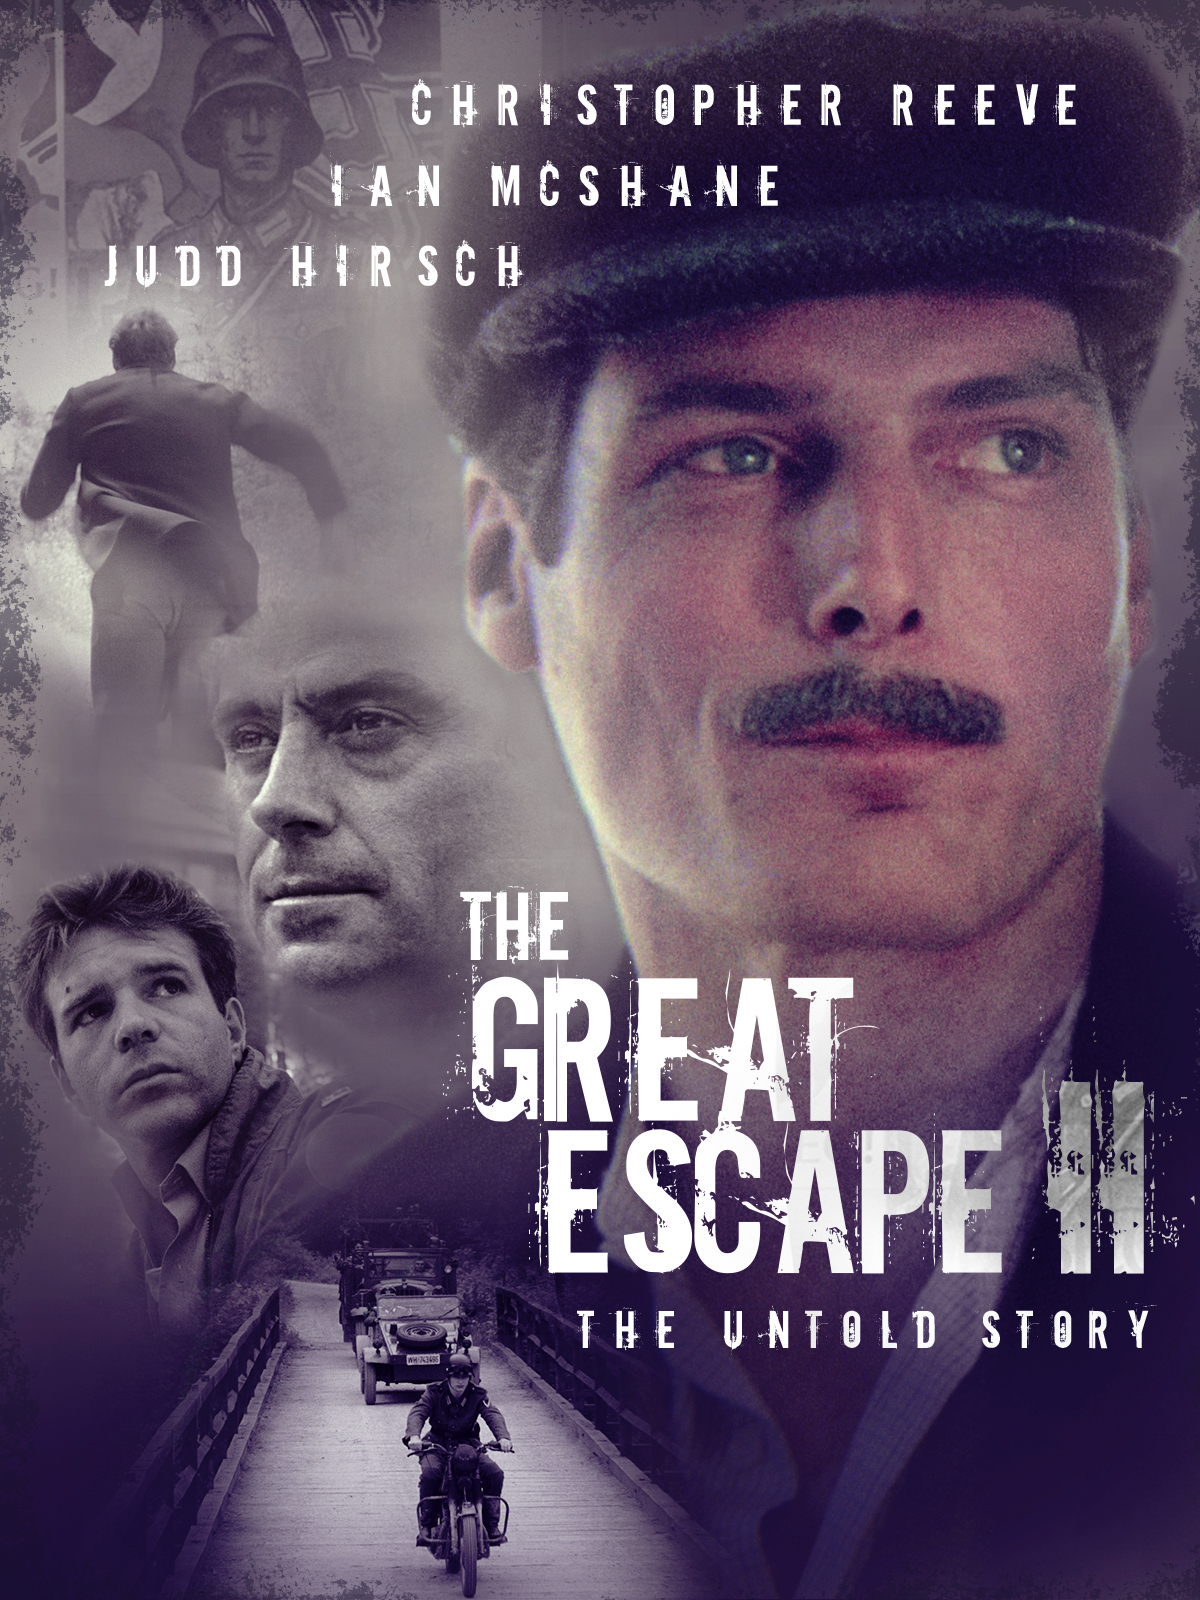 The Great Escape II: The Untold Story (1988) starring Christopher Reeve on DVD on DVD